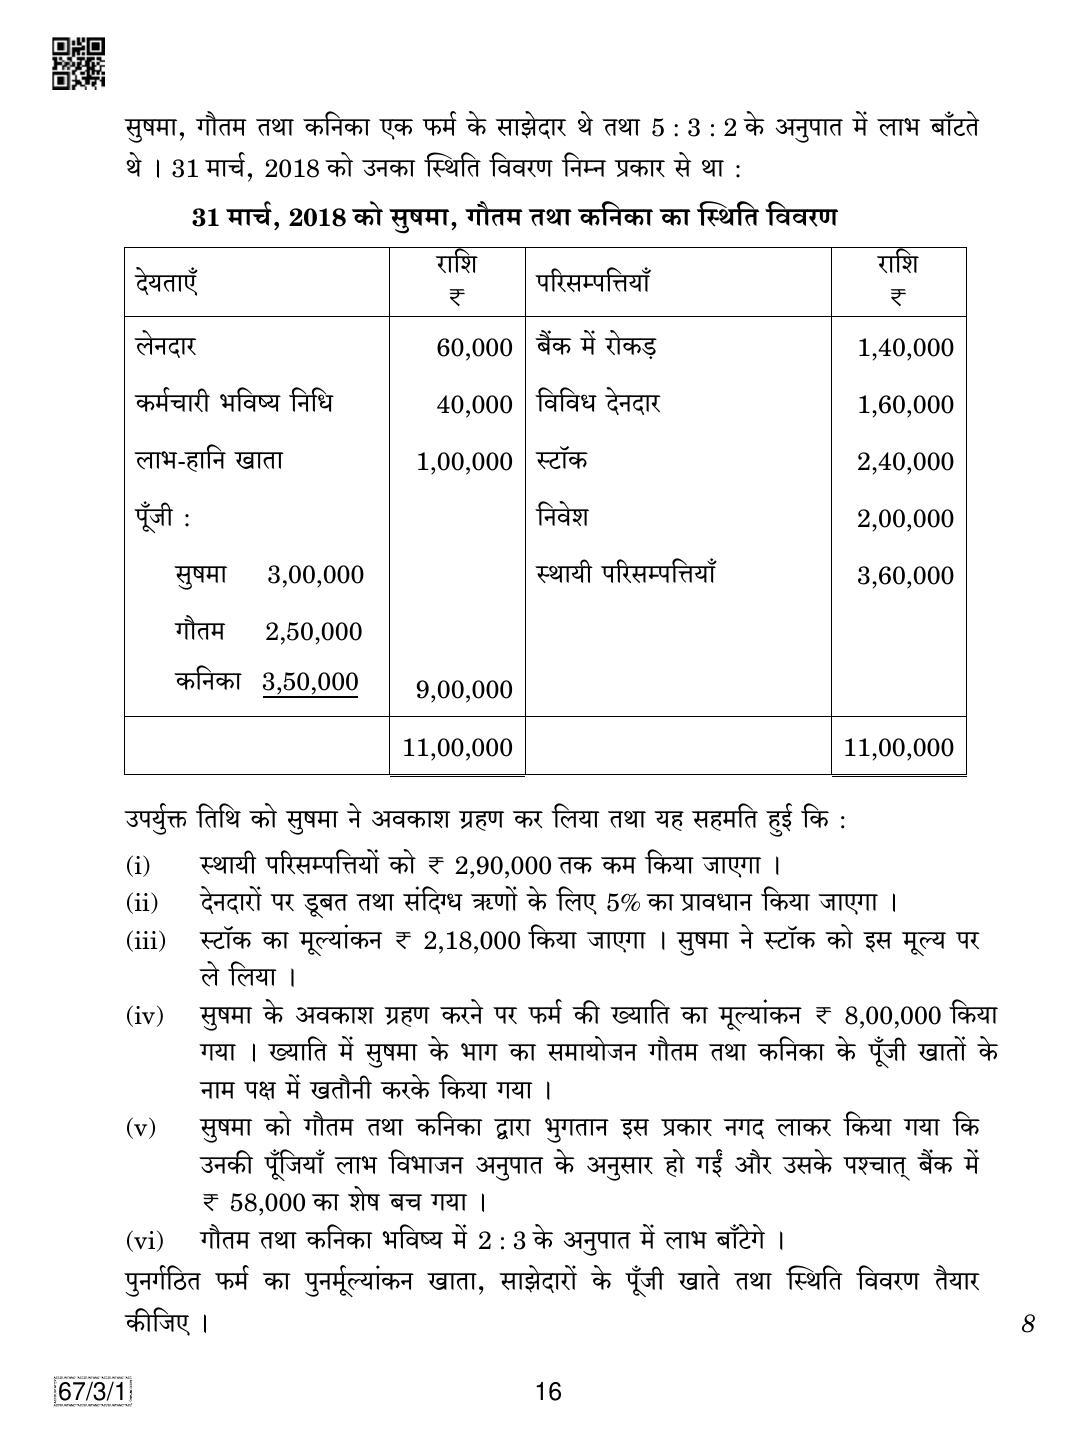 CBSE Class 12 67-3-1 Accountancy 2019 Question Paper - Page 16